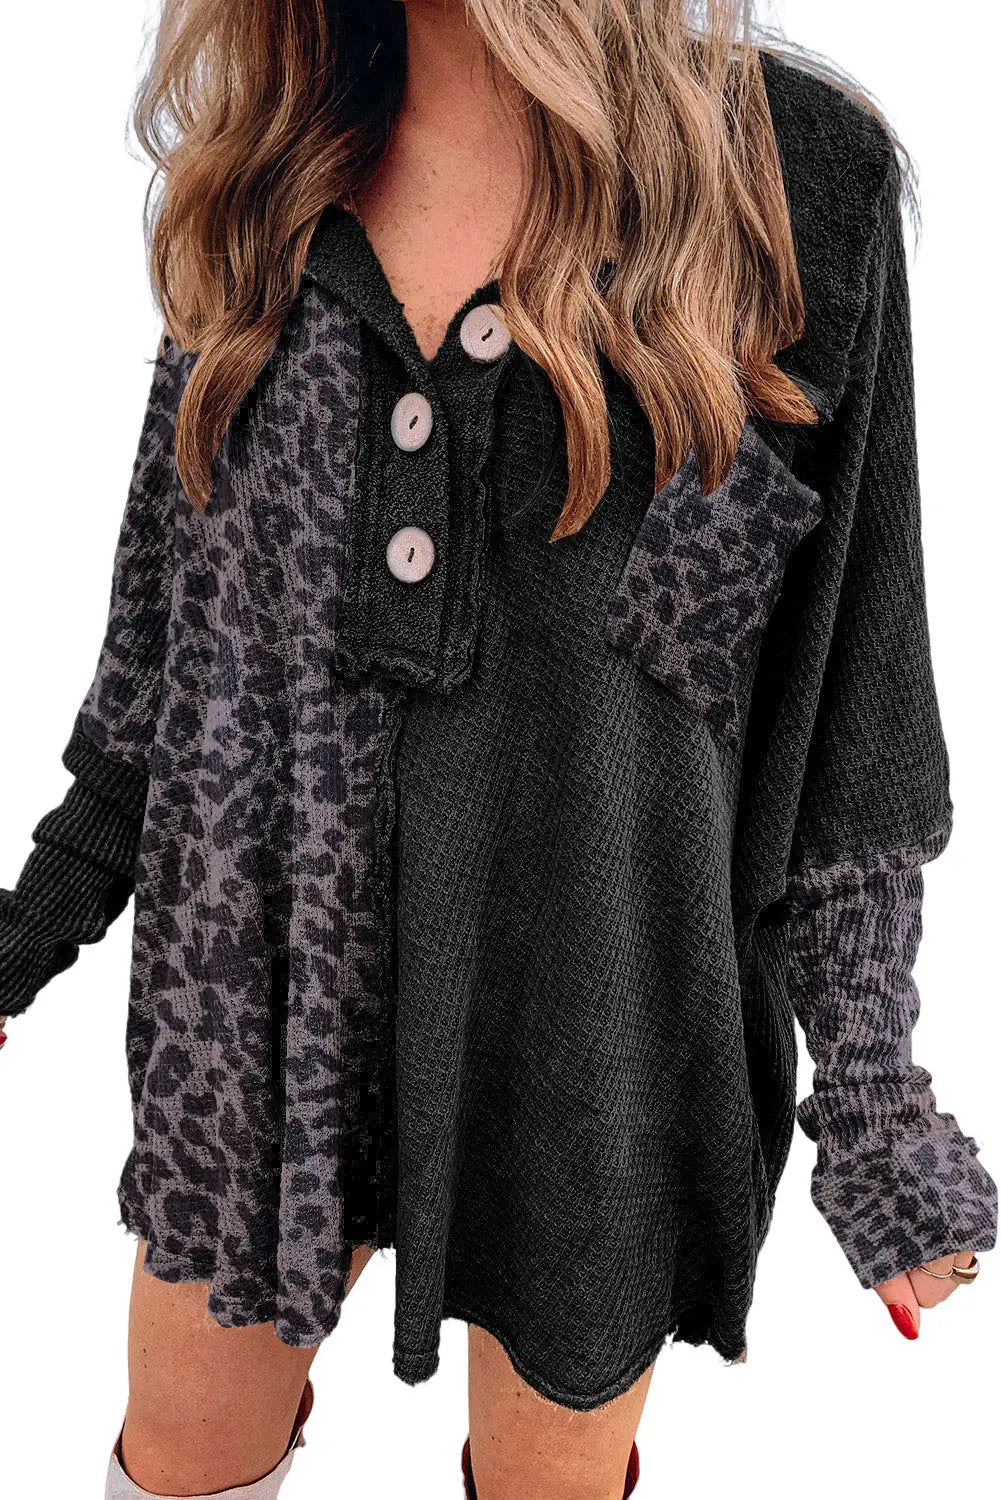 Black leopard patchwork waffle knit buttoned blouse - tops